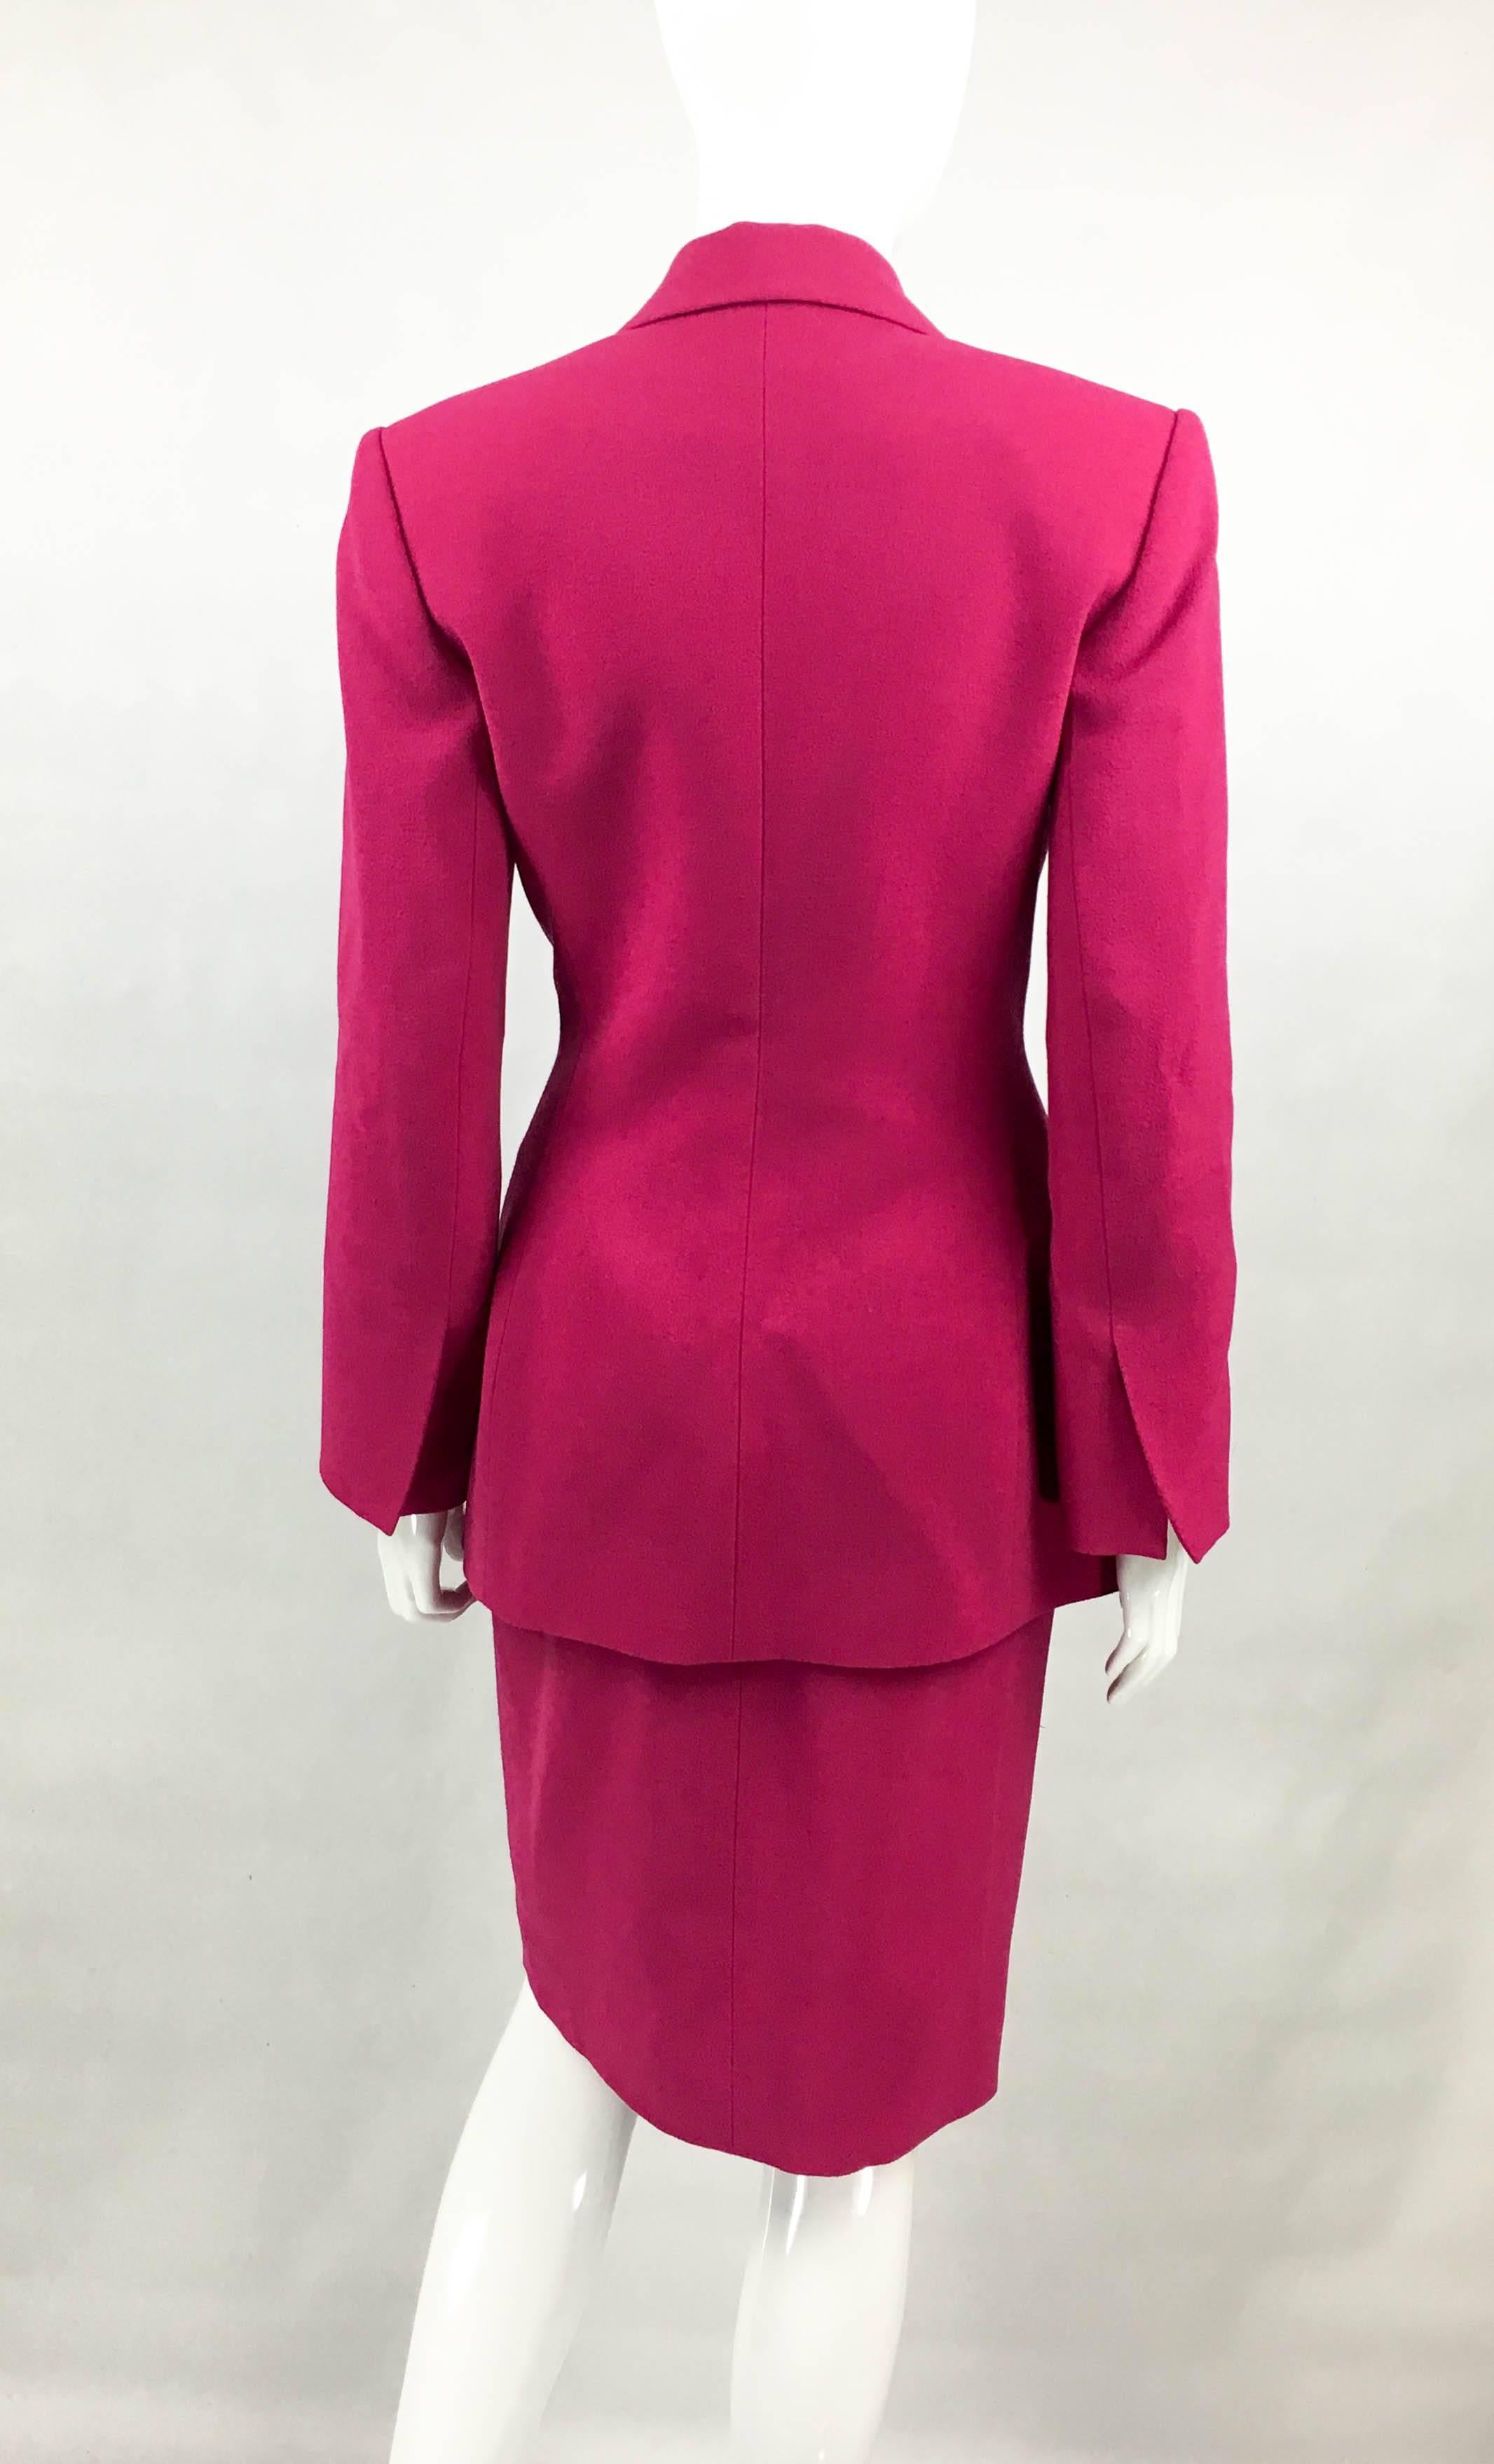 Women's 1980s Dior Numbered Demi-Couture Hot Pink Suit With Golden Tassel  For Sale